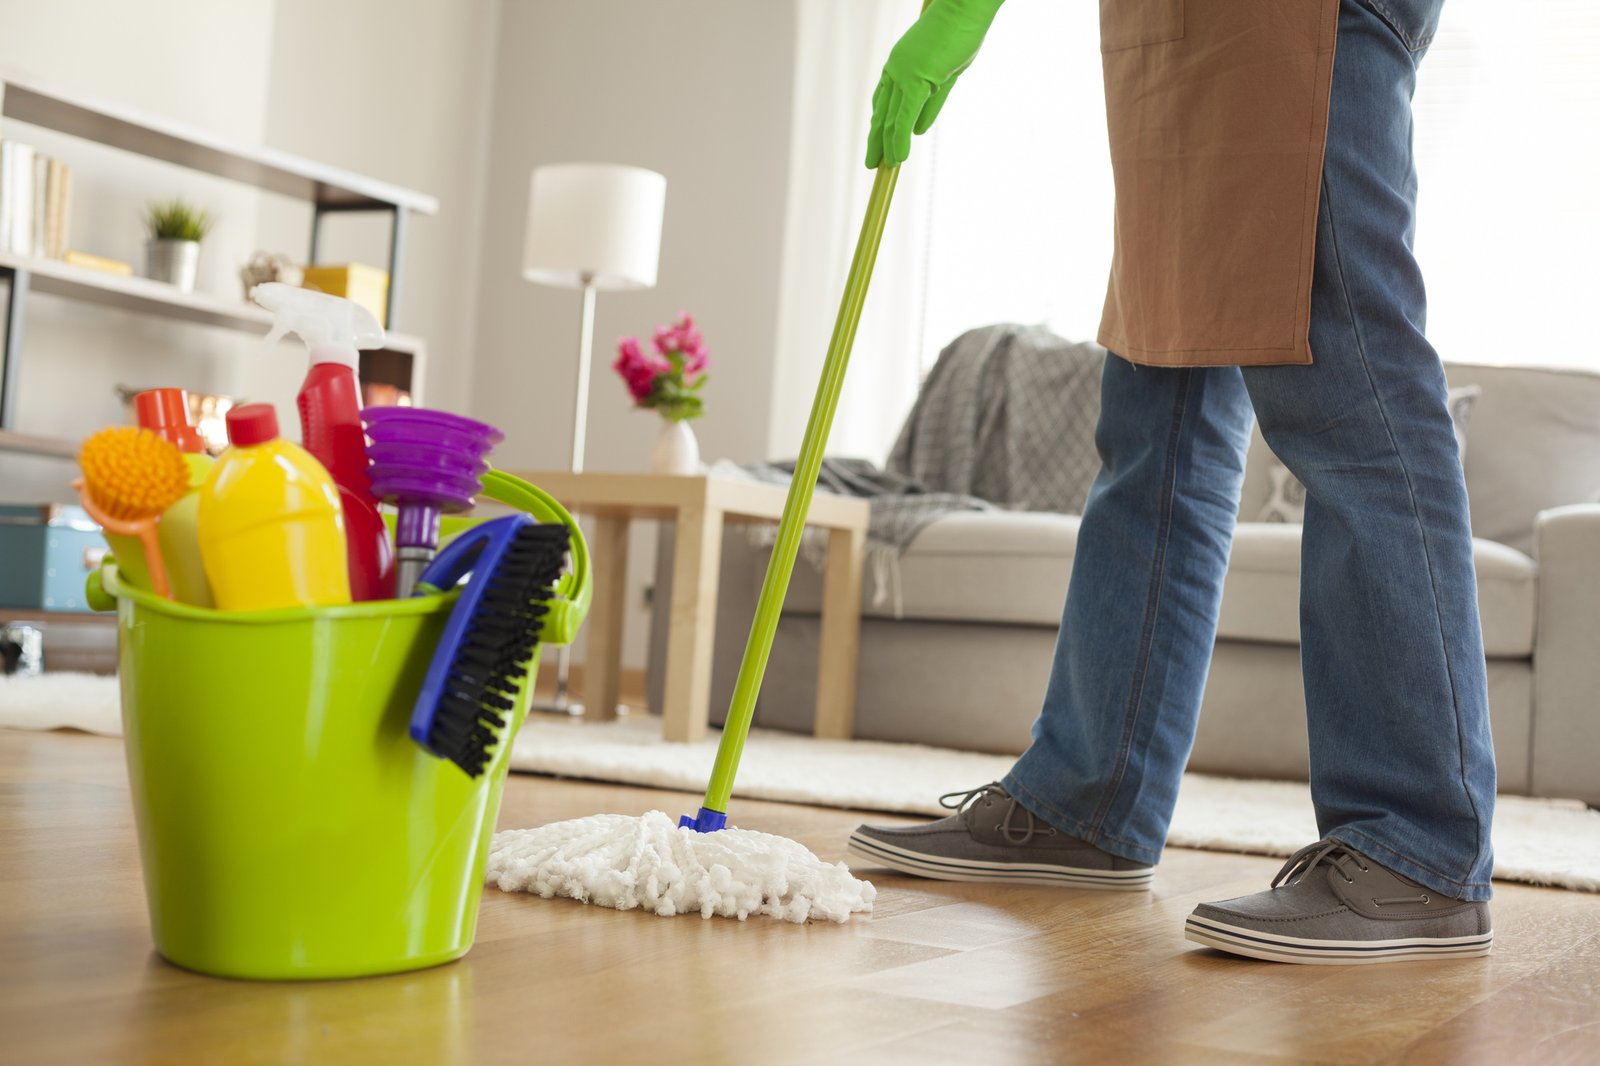 Easy tips to clean your home